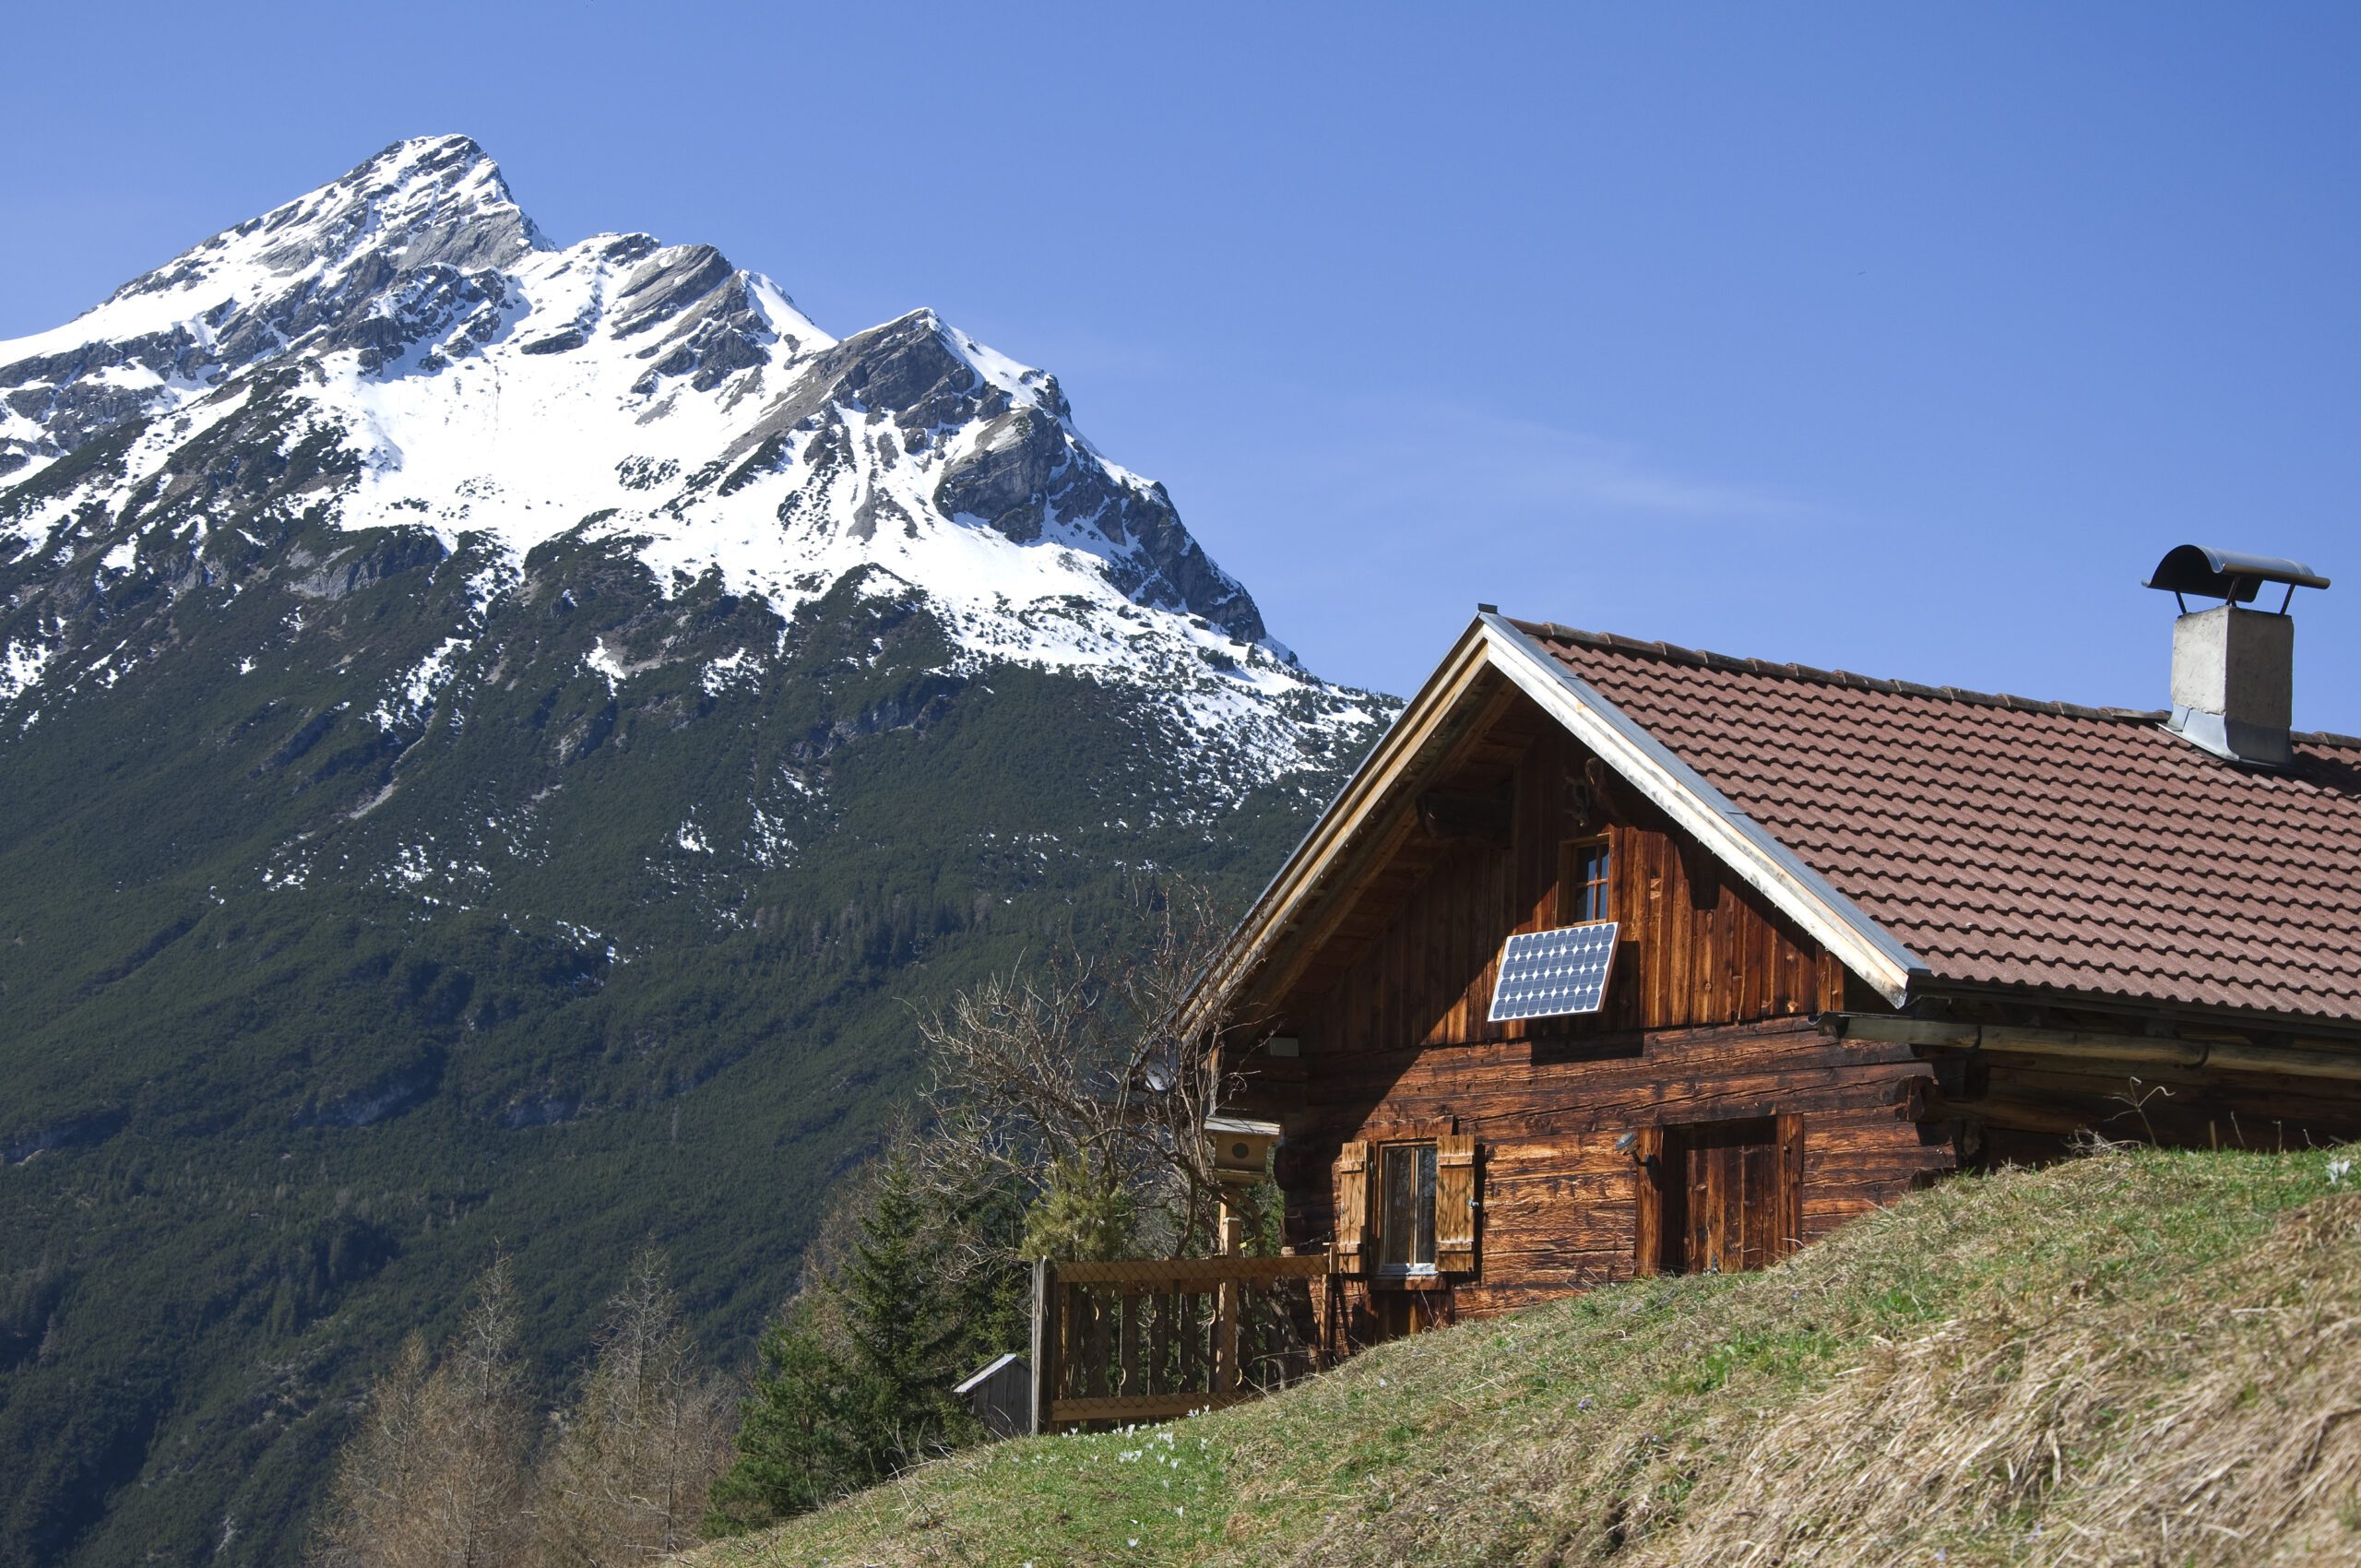 A log cabin in the snowy mountains, powered by remote solar panels